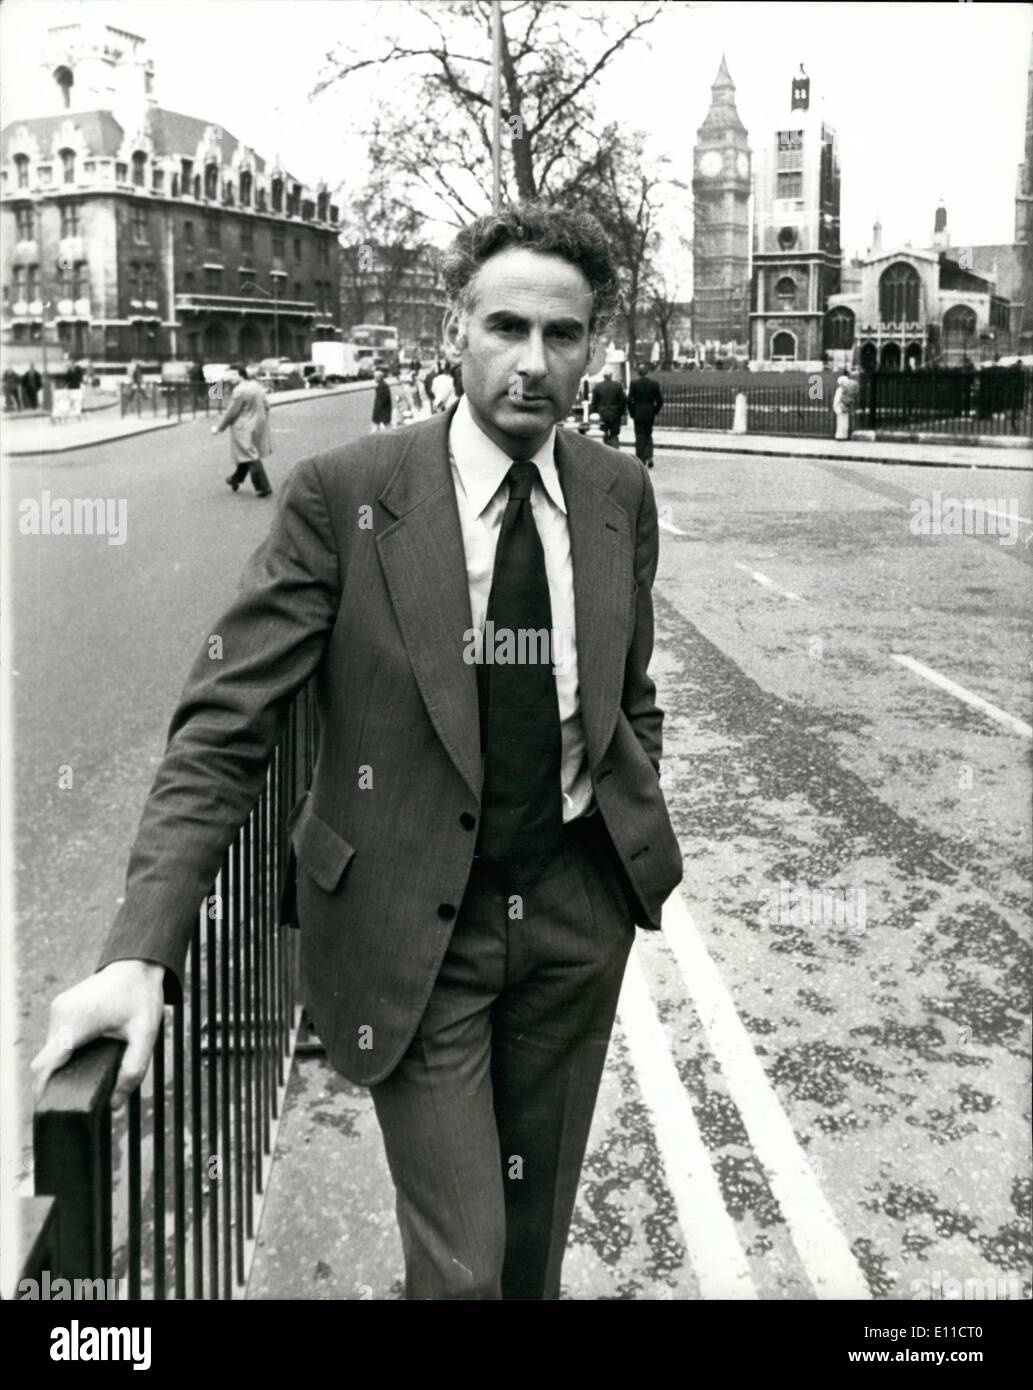 Mar. 03, 1977 - THE TORY WHO MISSED THE VOTE. Mr. Anthony Steen, Conservative Mp From Wavertree, who missed Wednesday night's No Confidence vote because he did not wake up in time, in Westminster yesterday after receiving an apology from the Post Office for ringing a wrong number when trying to give him his alarm call. Mr. Steen had made an 18-hour journey from Bangladesh for the vote. Stock Photo